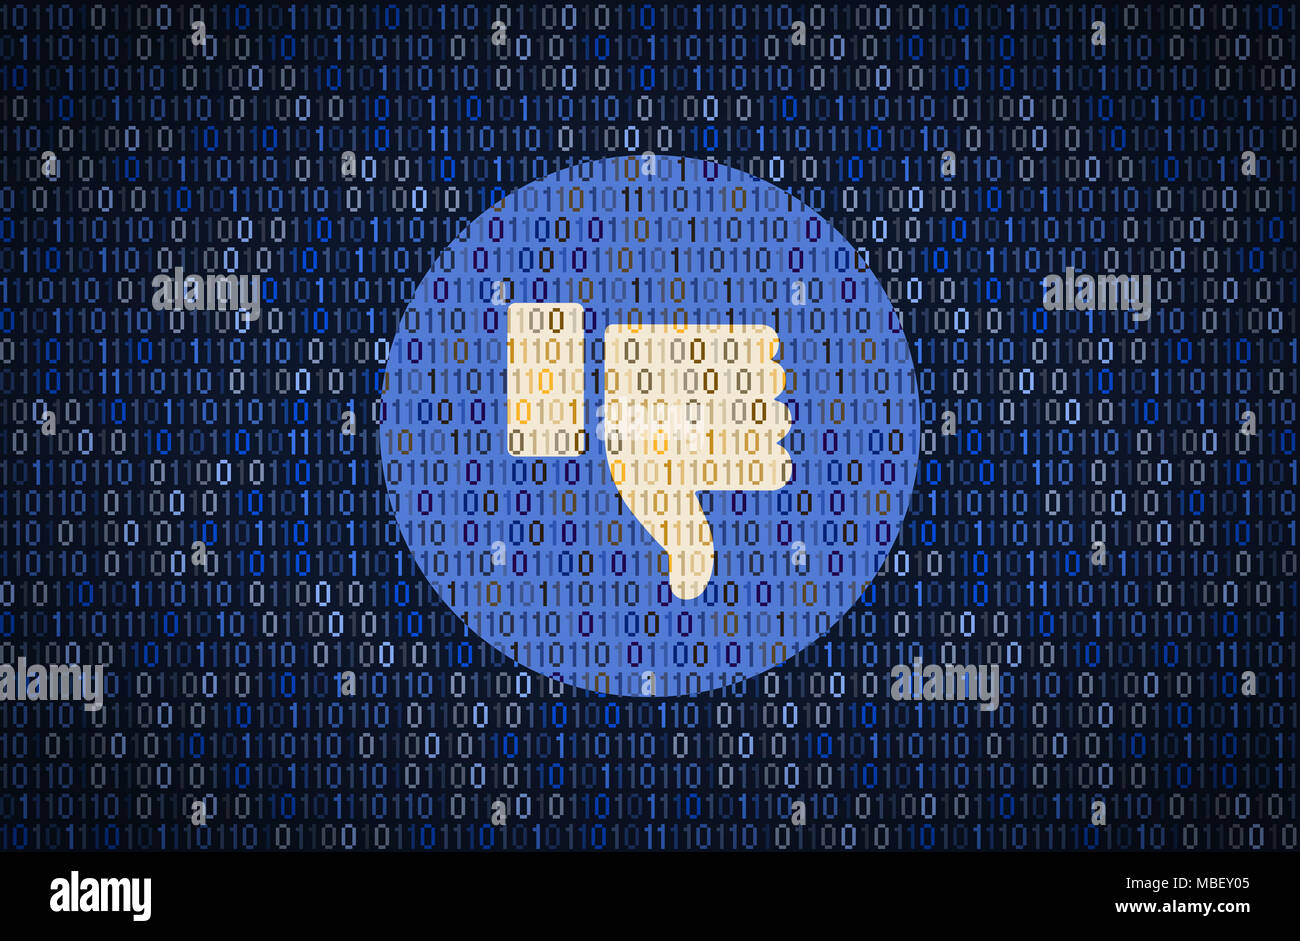 GALATI, ROMANIA - 10 APRIL 2018: Facebook thumb down security and privacy issues. Data encription concept Stock Photo